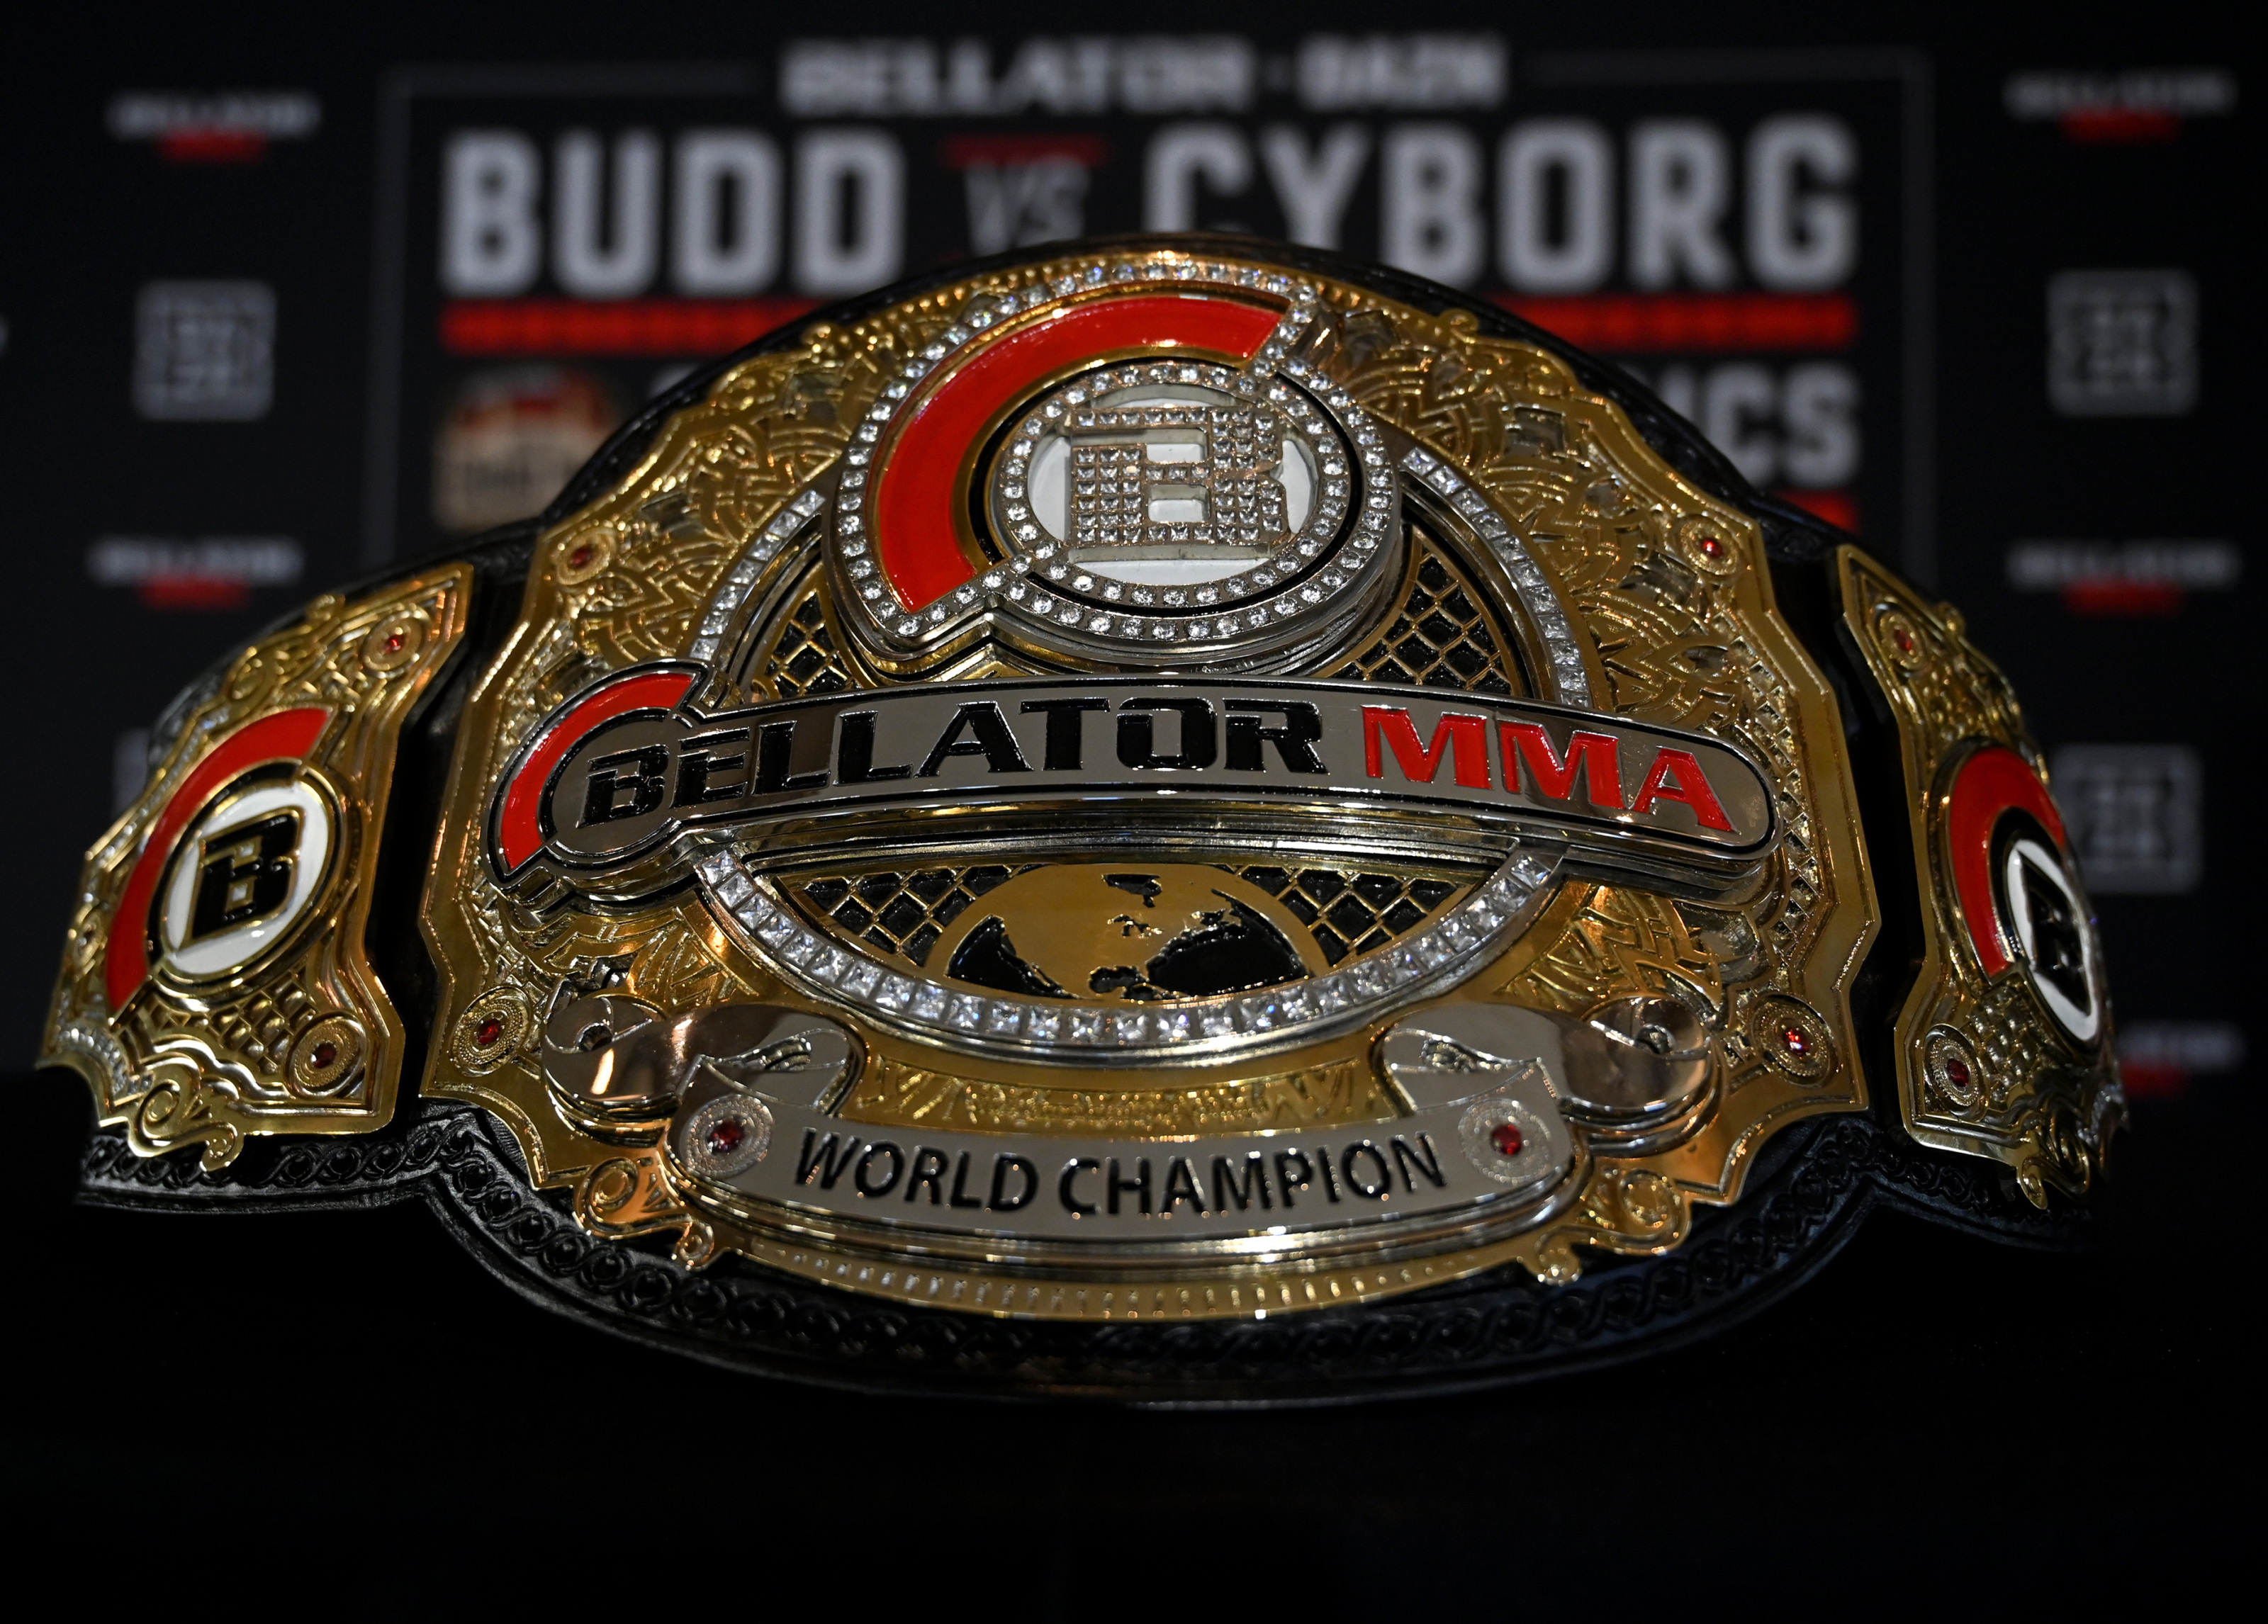 10 Biggest free agent signings in the history of Bellator